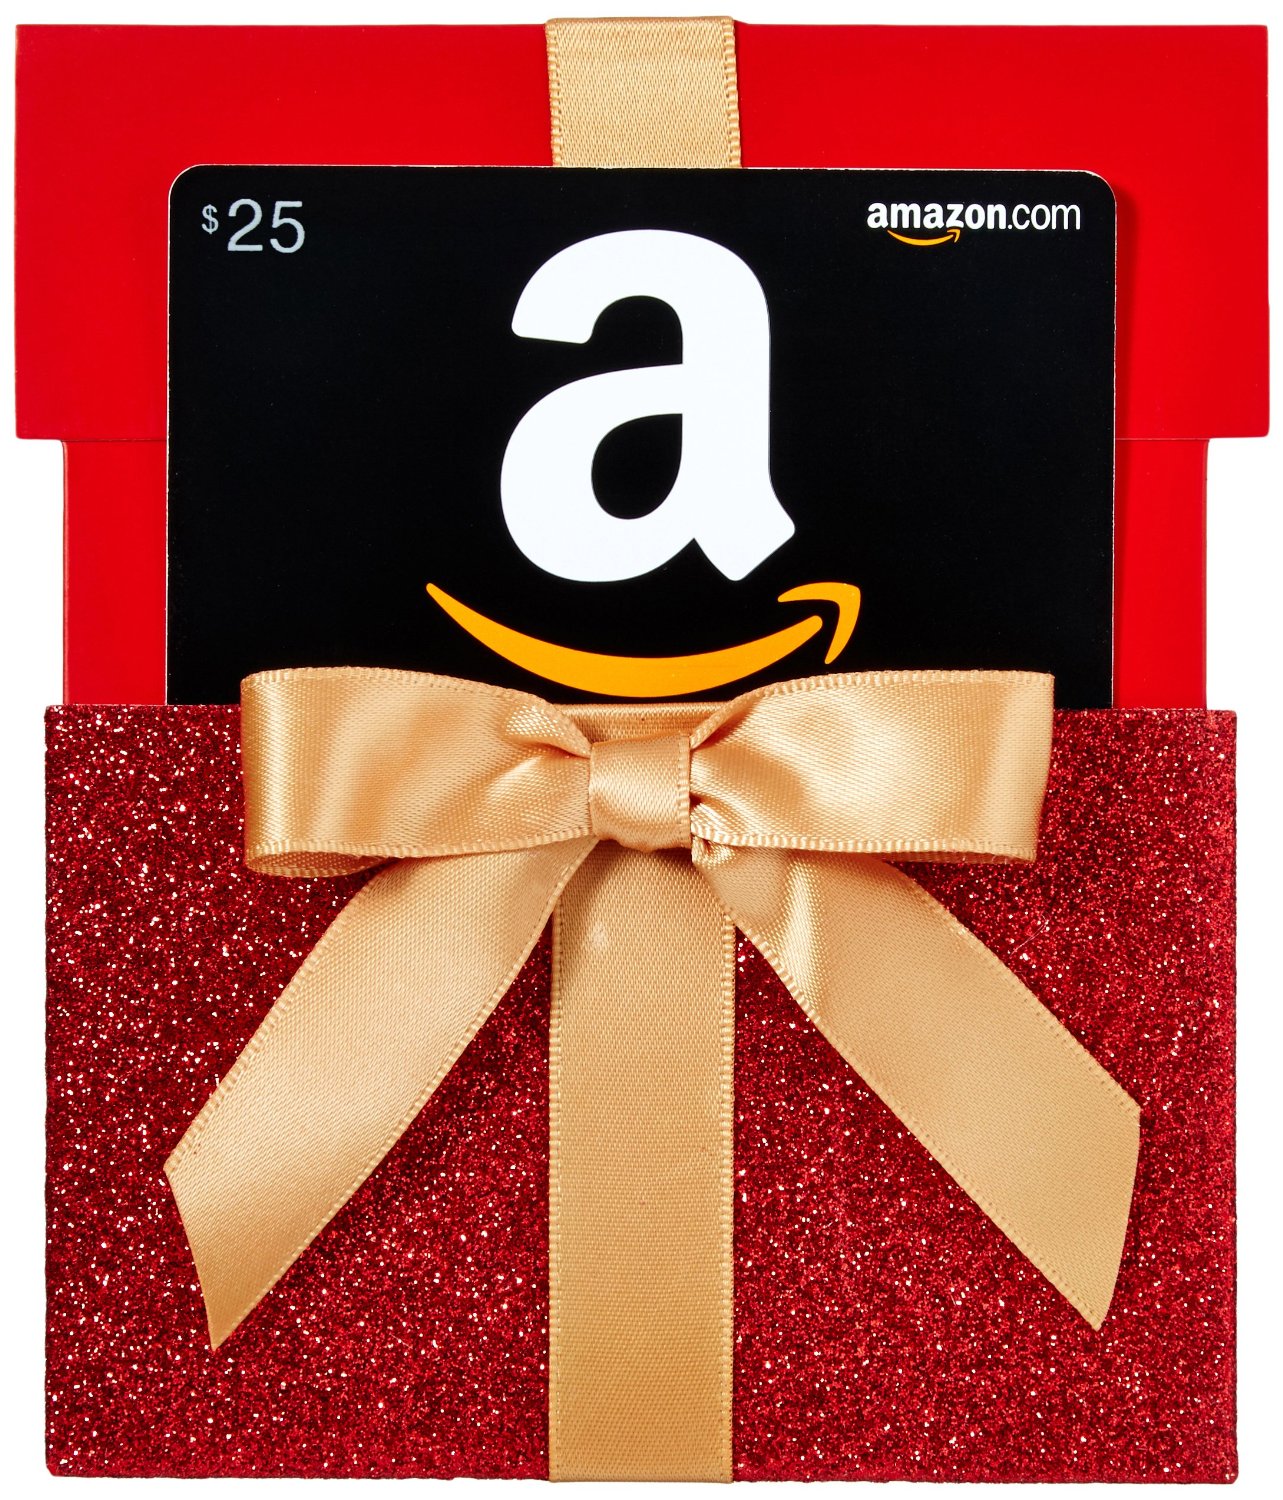 amazon-com-gift-card-in-gift-box-reveal